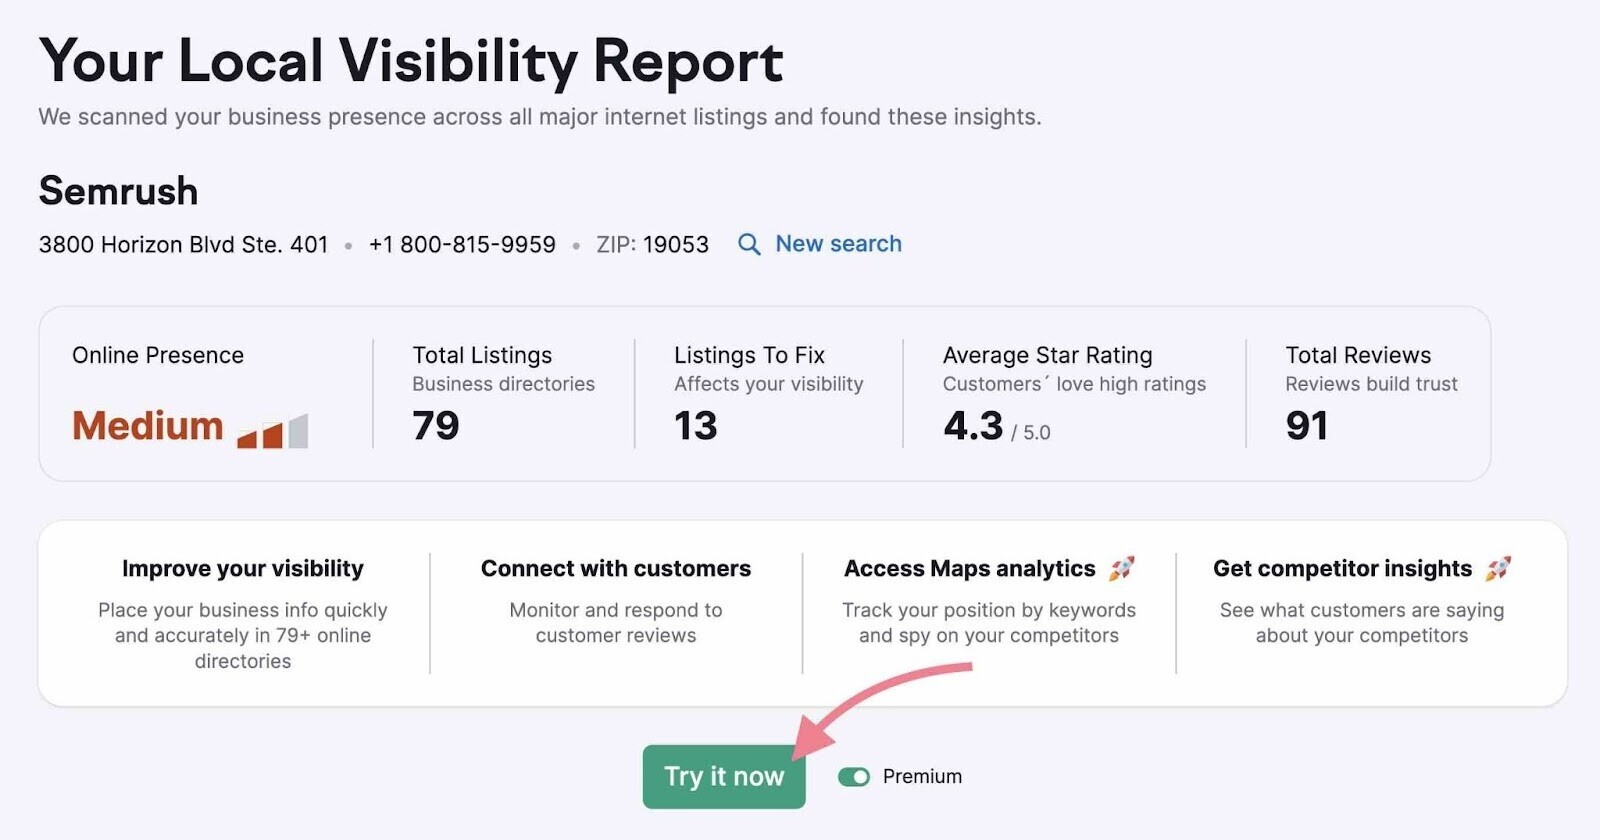 "Your Local Visibility Report" page with "Try it now" button highlighted